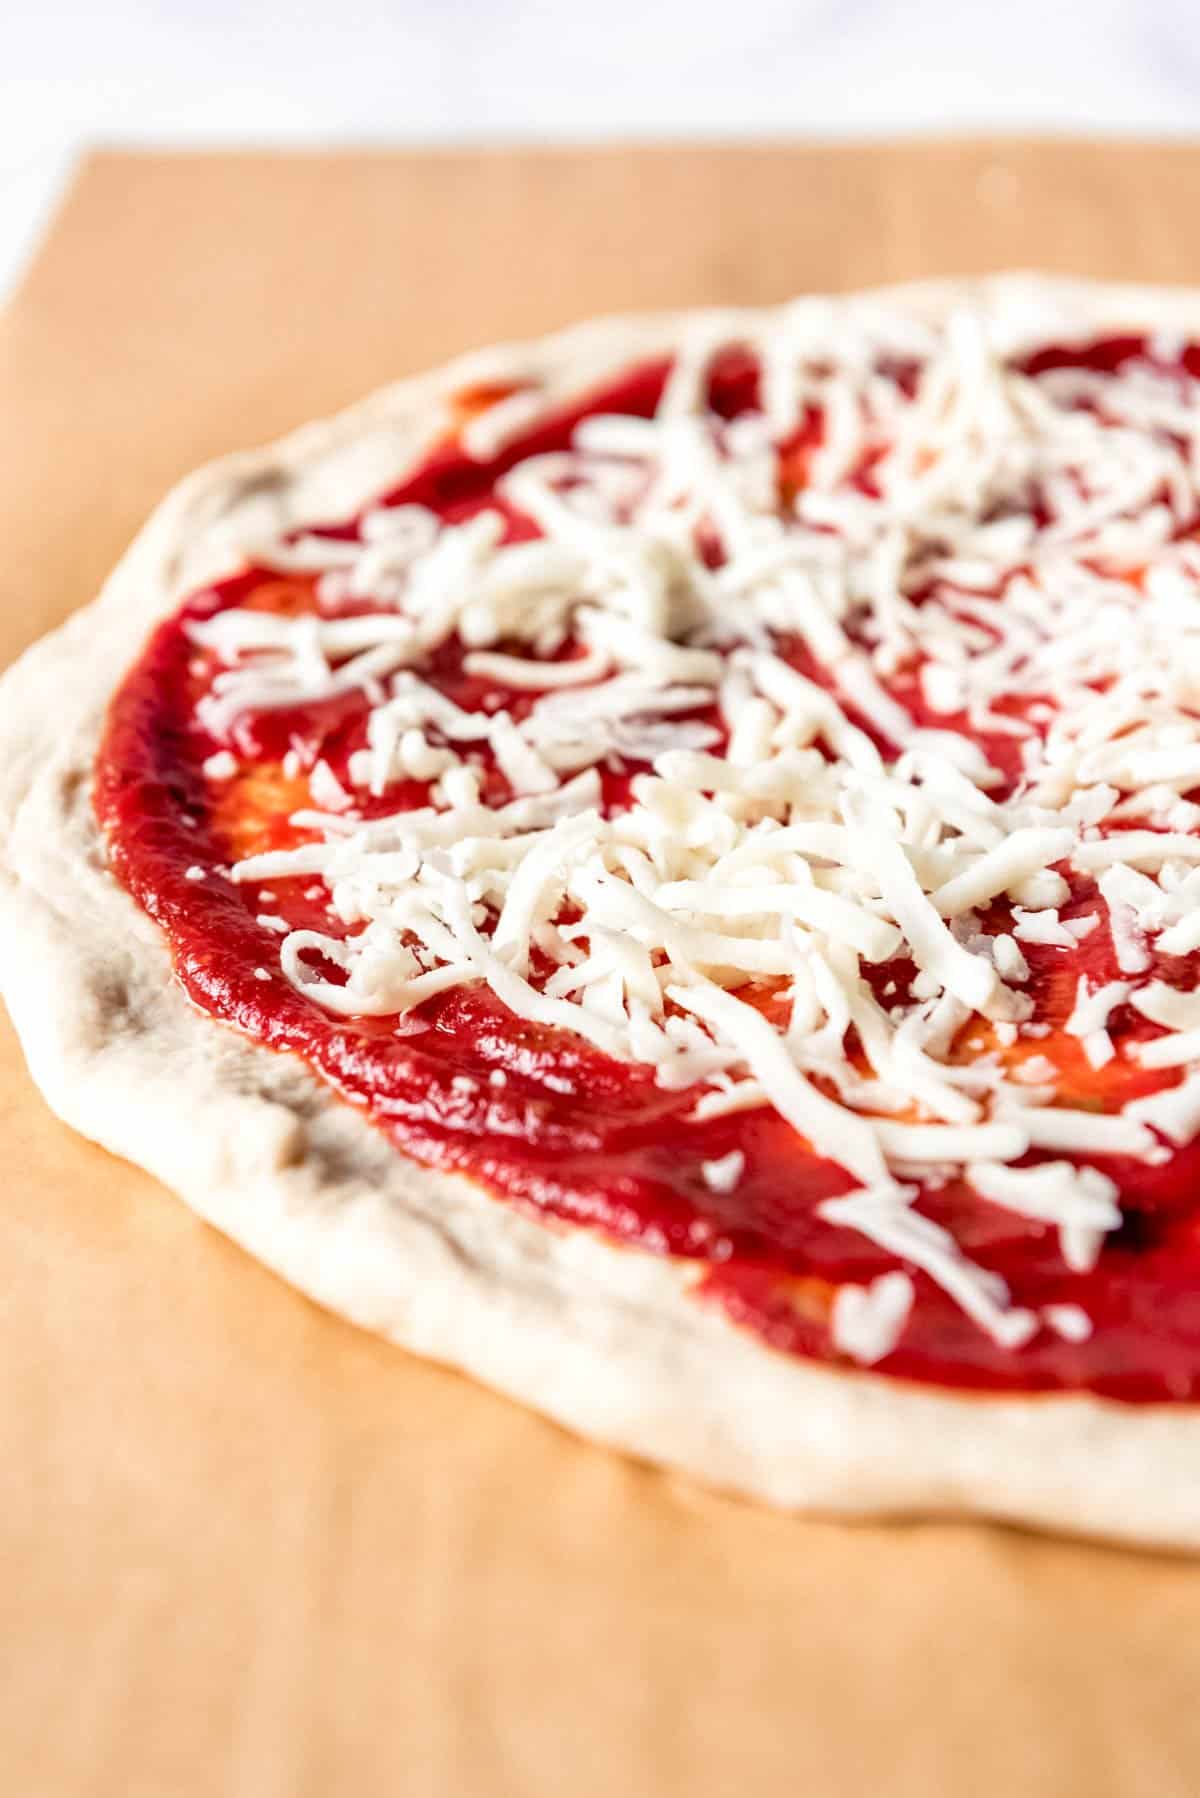 An image of a pizza topped with homemade tomato sauce and shredded mozzarella cheese.